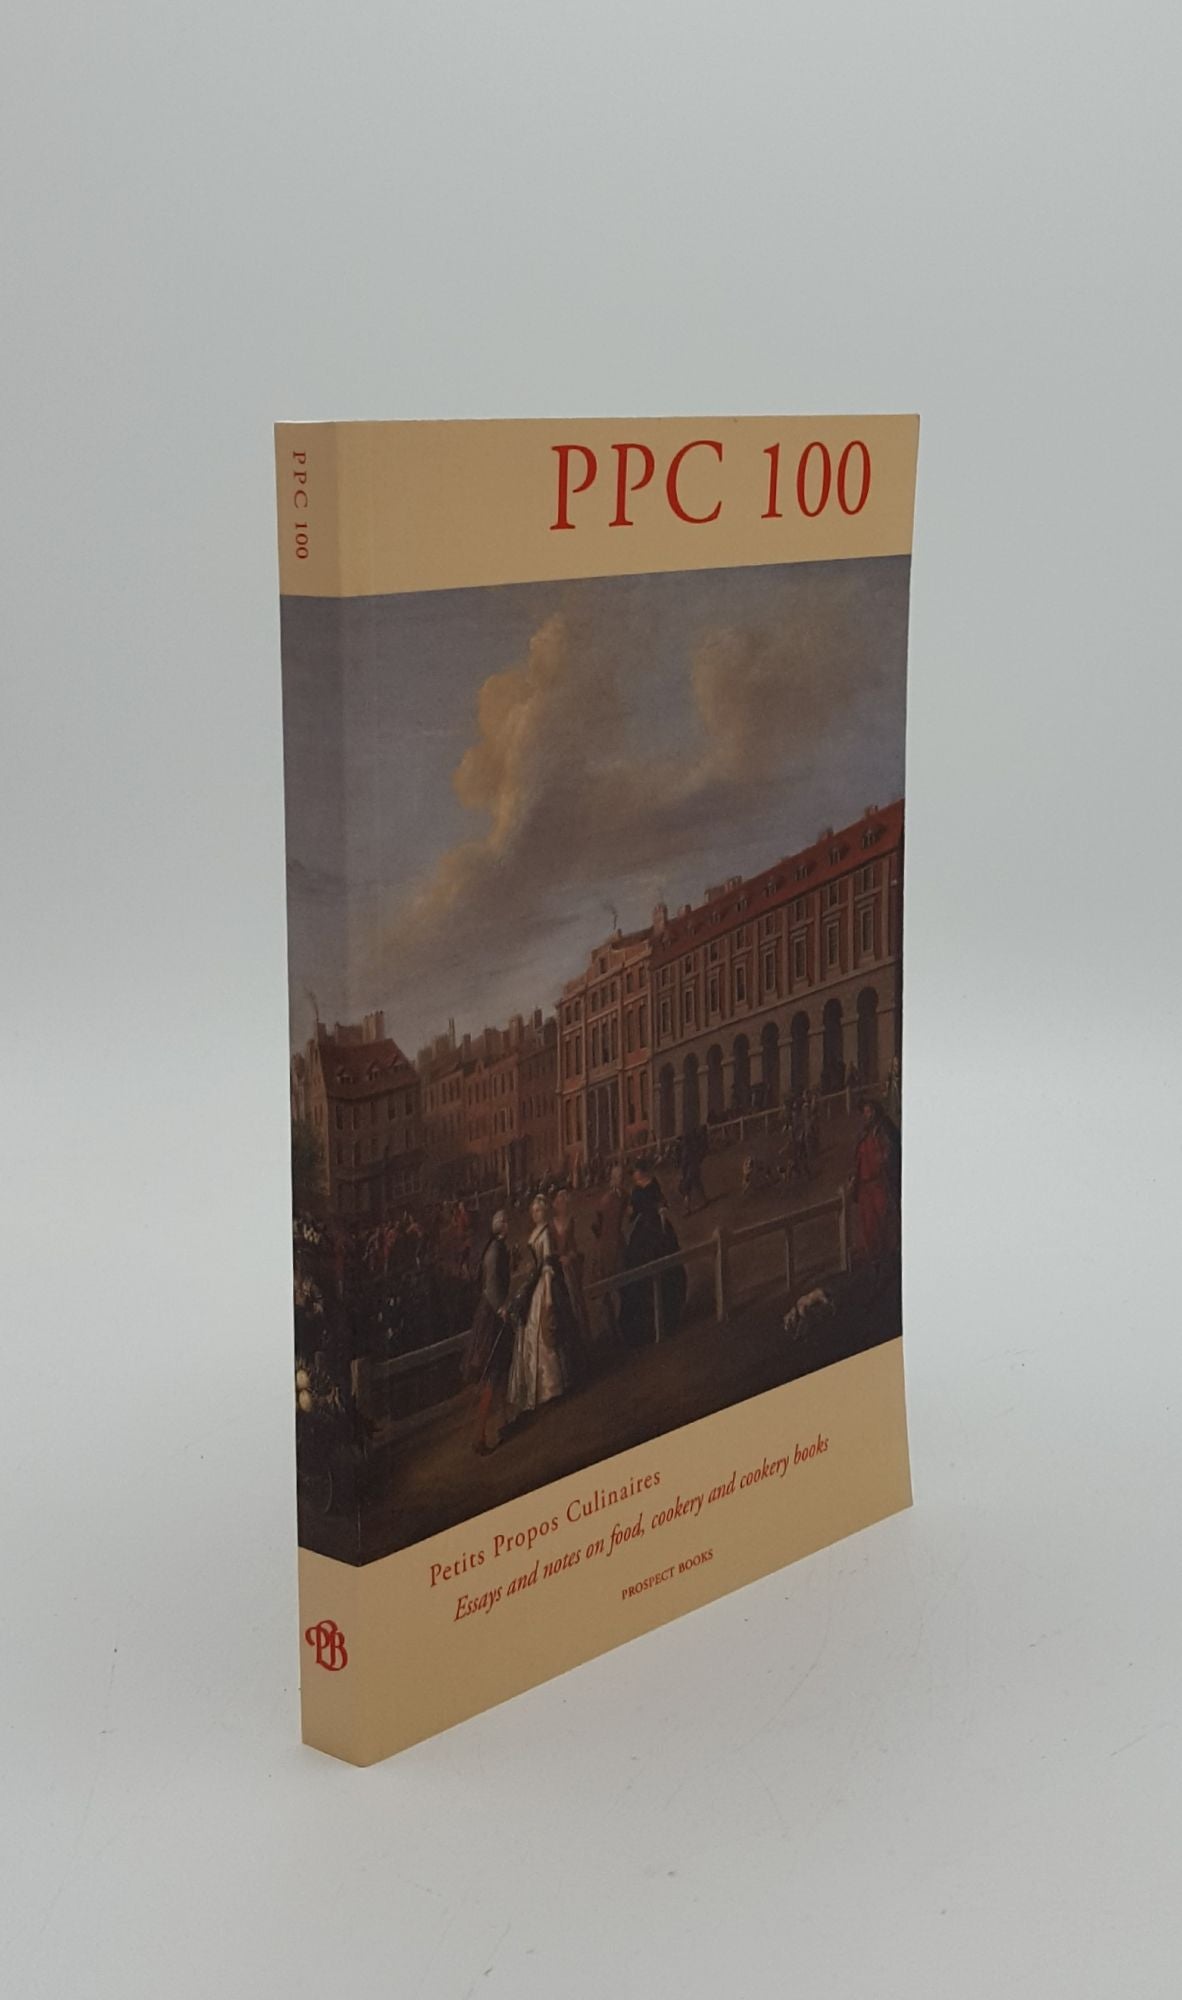 JAINE Tom - Petit Propos Culinaires Ppc 100 Essays and Notes on Food Cookery and Cookery Books